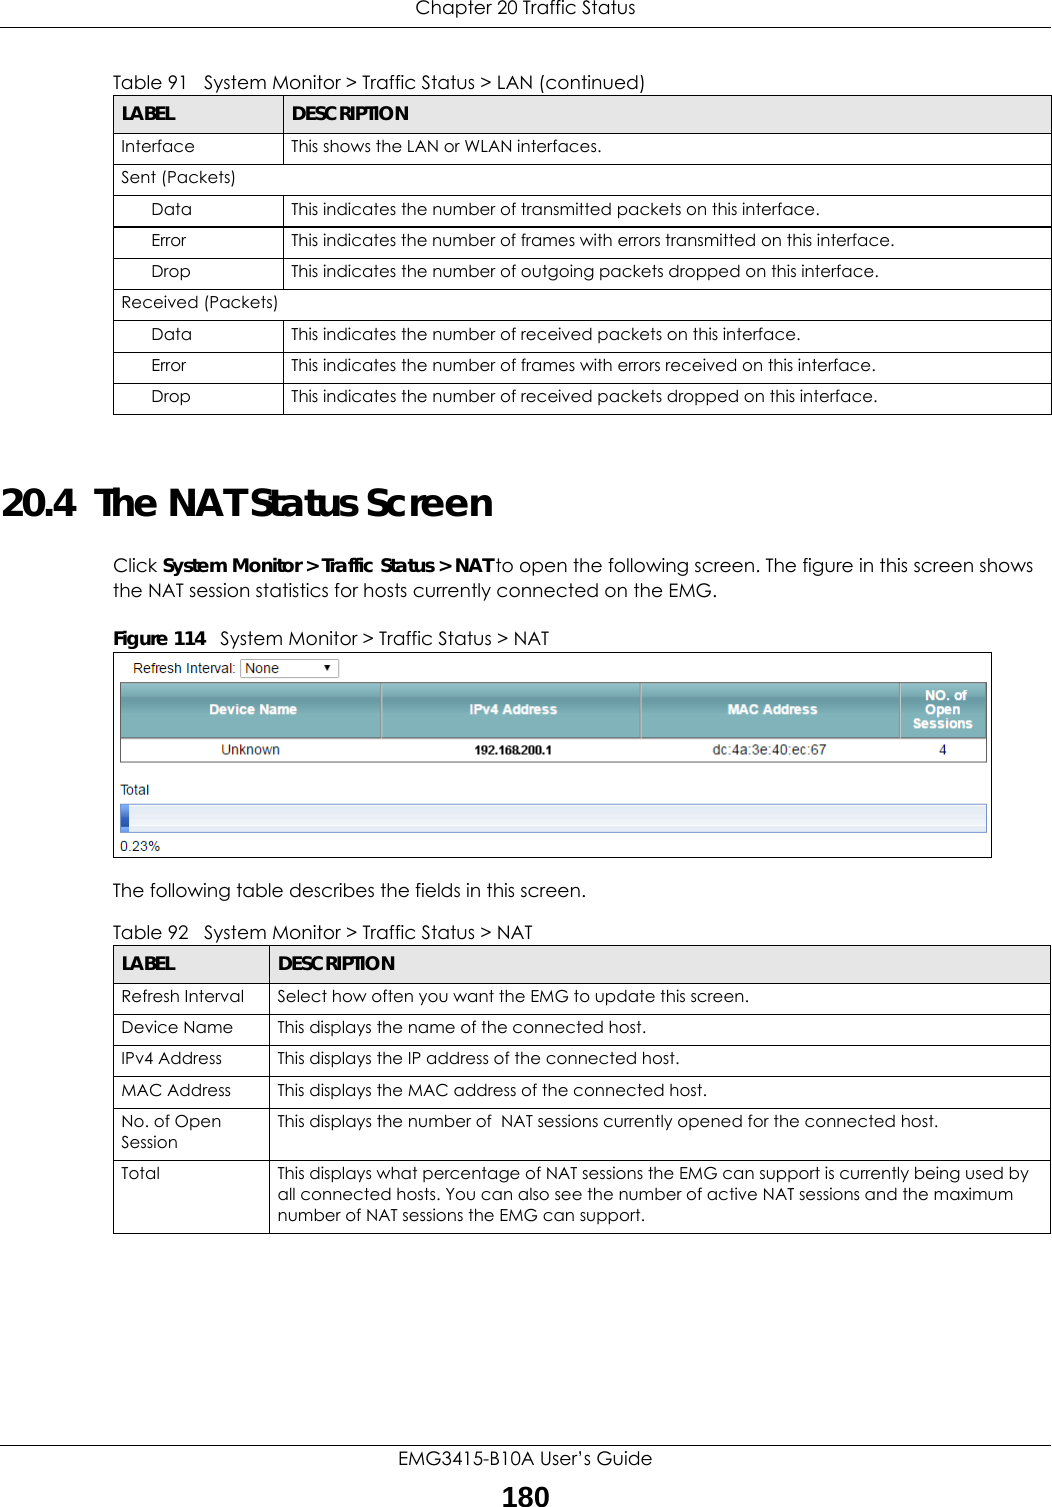 Chapter 20 Traffic StatusEMG3415-B10A User’s Guide18020.4  The NAT Status ScreenClick System Monitor &gt; Traffic Status &gt; NAT to open the following screen. The figure in this screen shows the NAT session statistics for hosts currently connected on the EMG.Figure 114   System Monitor &gt; Traffic Status &gt; NAT  The following table describes the fields in this screen.   Interface This shows the LAN or WLAN interfaces.Sent (Packets)Data  This indicates the number of transmitted packets on this interface.Error This indicates the number of frames with errors transmitted on this interface.Drop This indicates the number of outgoing packets dropped on this interface.Received (Packets)Data  This indicates the number of received packets on this interface.Error This indicates the number of frames with errors received on this interface.Drop This indicates the number of received packets dropped on this interface.Table 91   System Monitor &gt; Traffic Status &gt; LAN (continued)LABEL DESCRIPTIONTable 92   System Monitor &gt; Traffic Status &gt; NATLABEL DESCRIPTIONRefresh Interval Select how often you want the EMG to update this screen.Device Name This displays the name of the connected host.IPv4 Address This displays the IP address of the connected host.MAC Address This displays the MAC address of the connected host.No. of Open SessionThis displays the number of  NAT sessions currently opened for the connected host.Total This displays what percentage of NAT sessions the EMG can support is currently being used by all connected hosts. You can also see the number of active NAT sessions and the maximum number of NAT sessions the EMG can support.